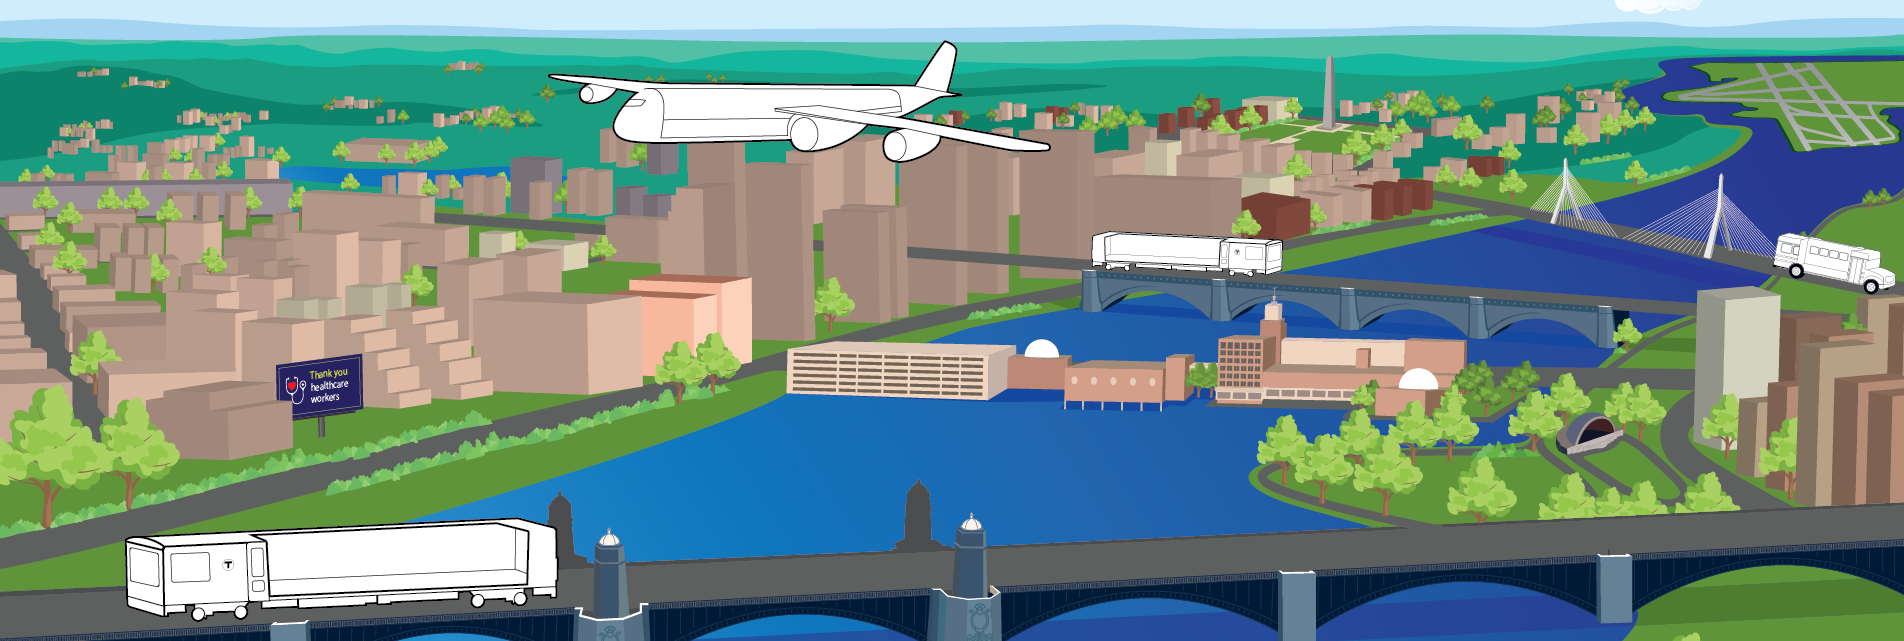 Illustration of the Charles River